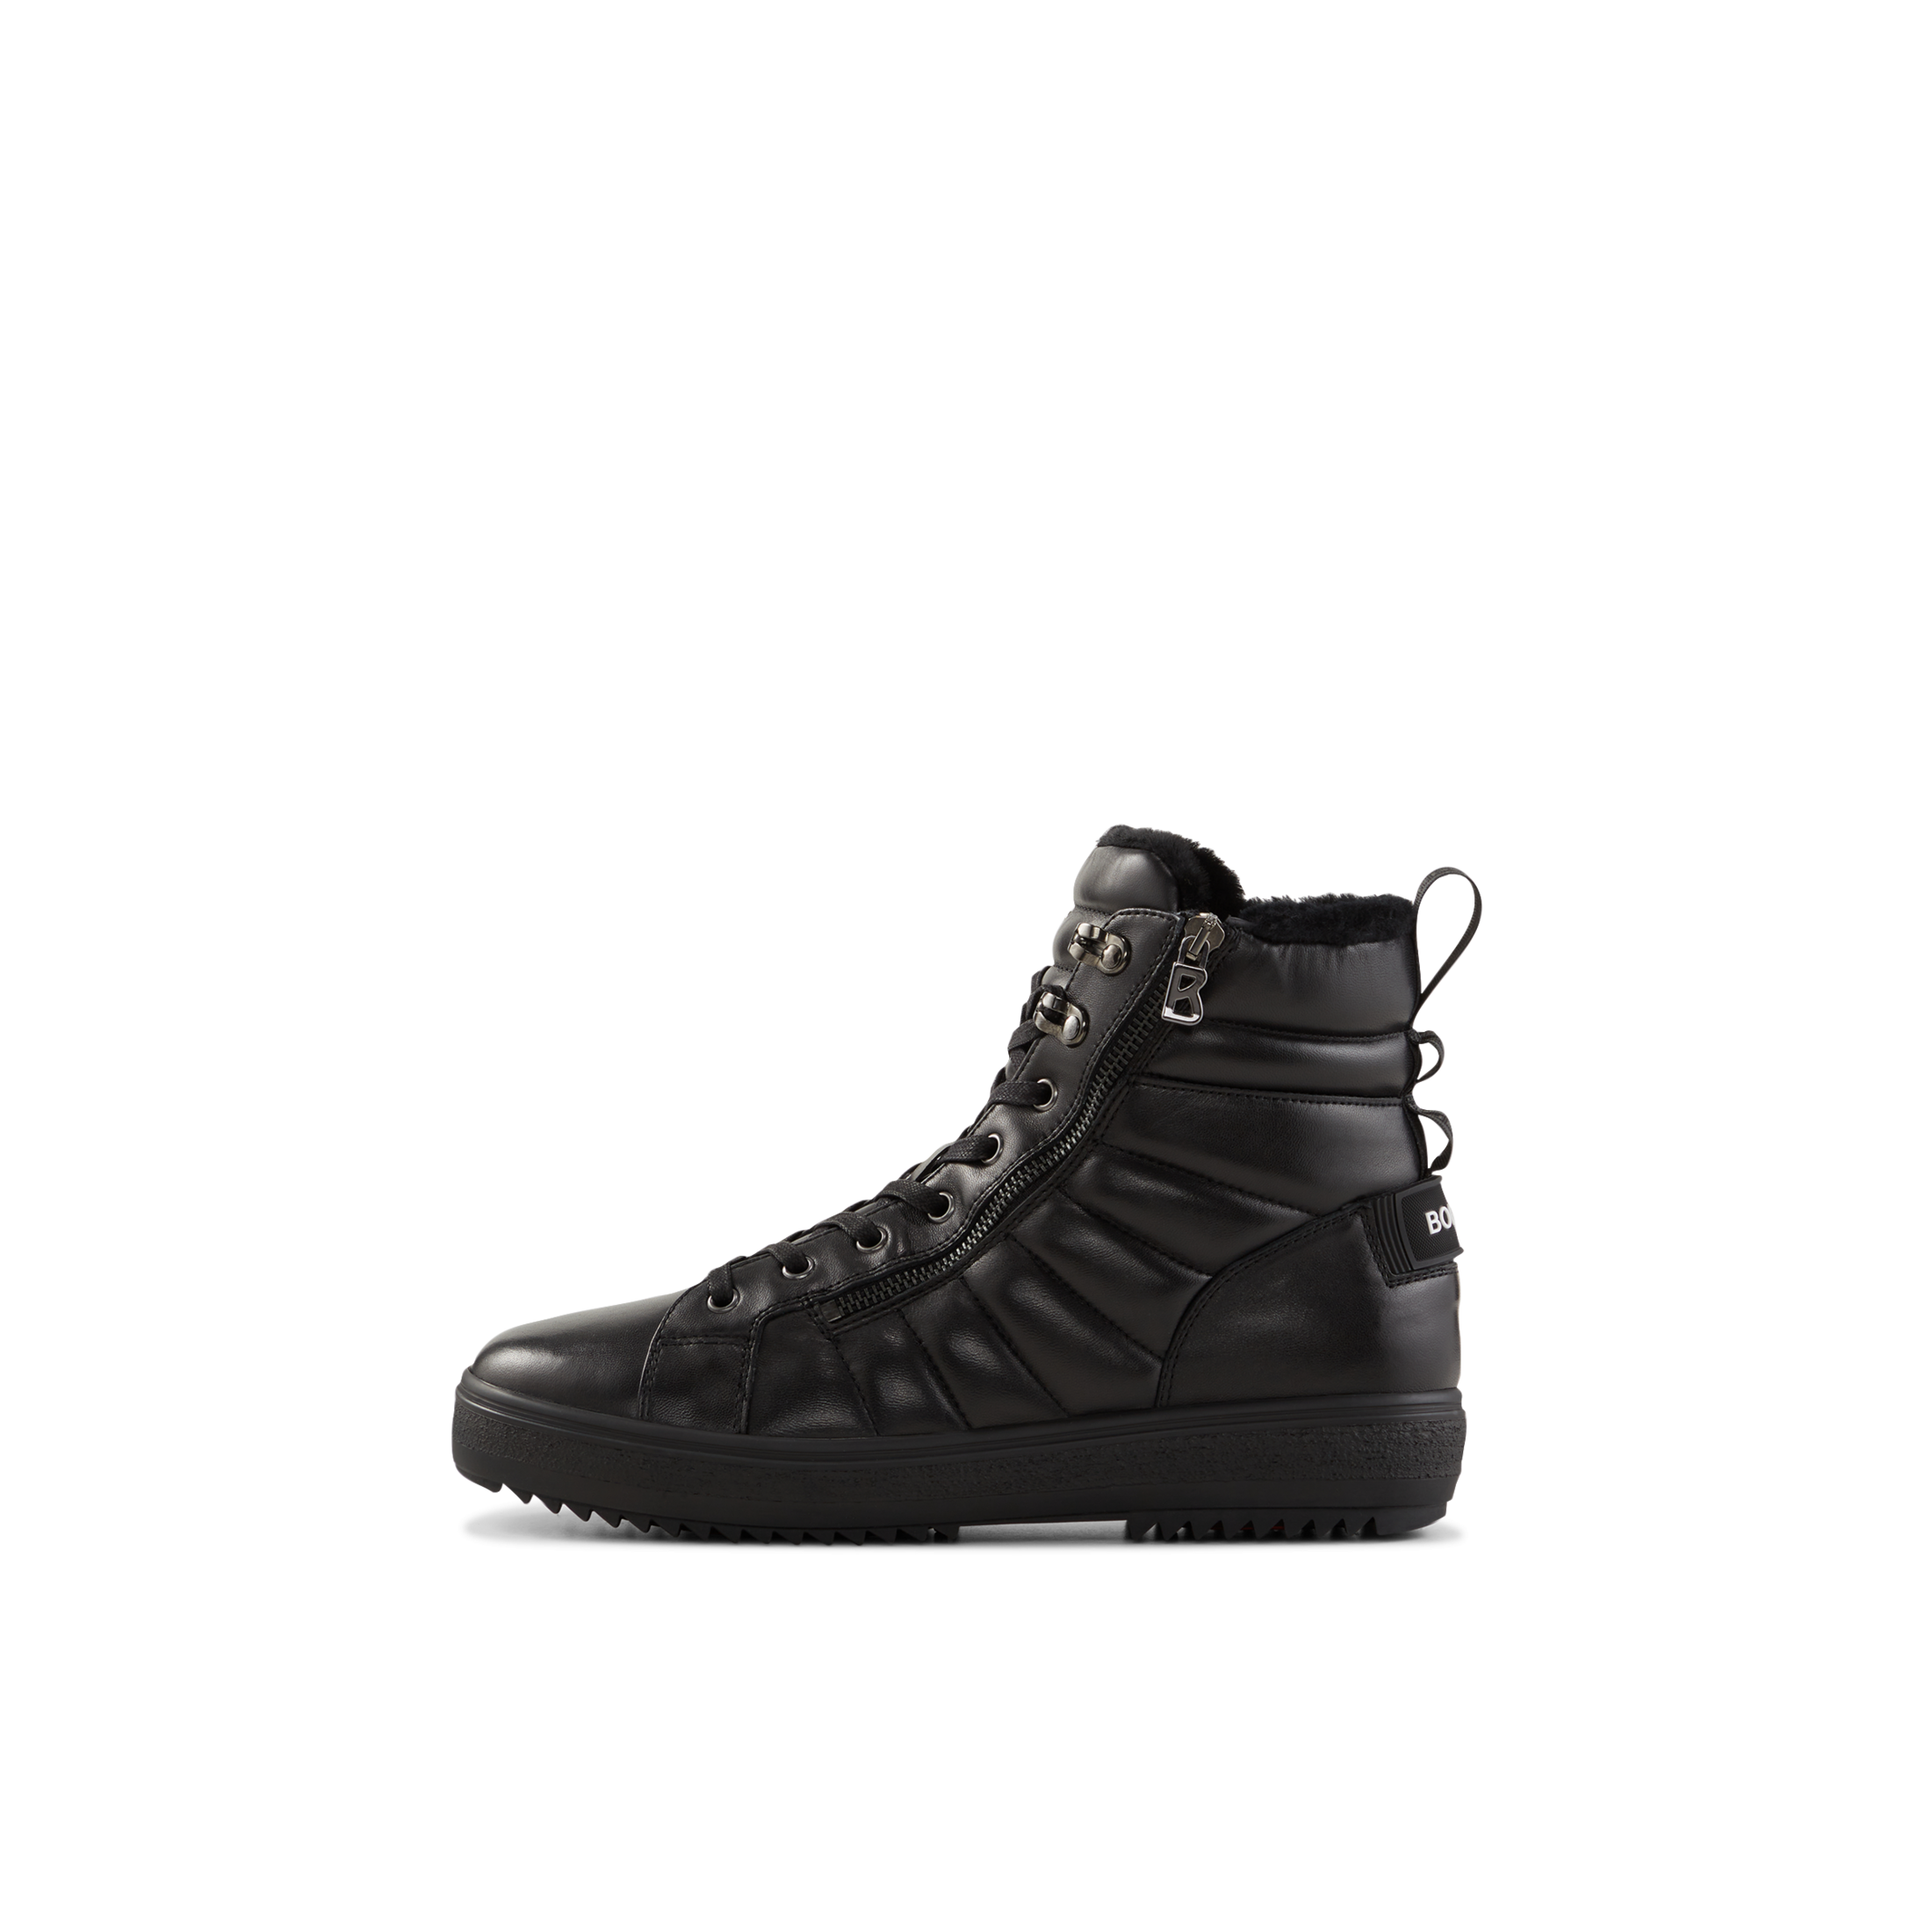 BOGNER Anchorage High-top sneakers with spikes for men - Black - US 13 product